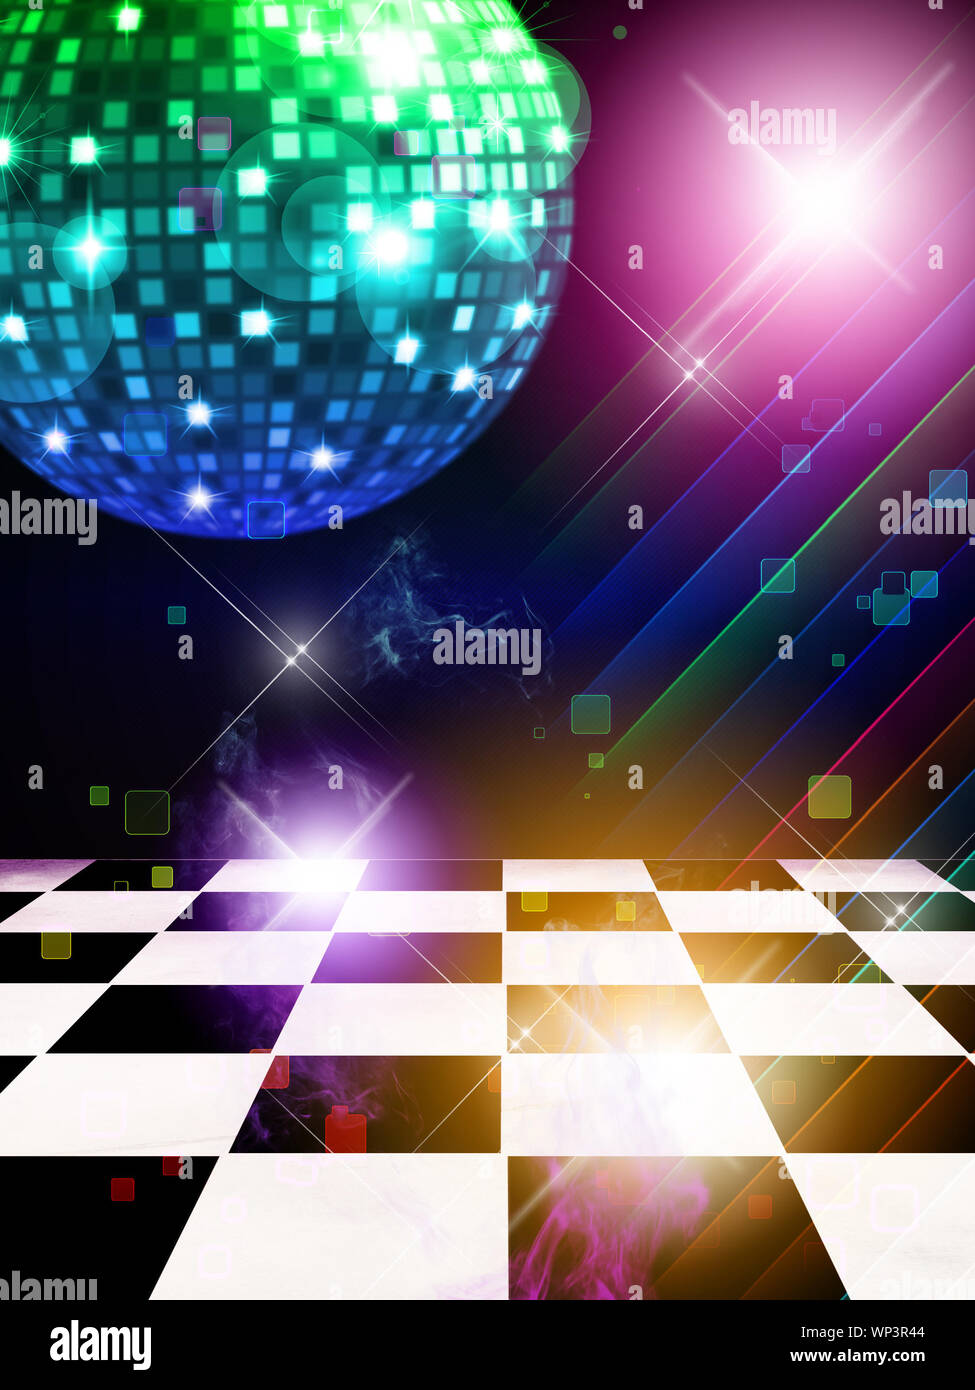 Illustration of dance floor with disco mirror ball and stars background  Stock Photo - Alamy